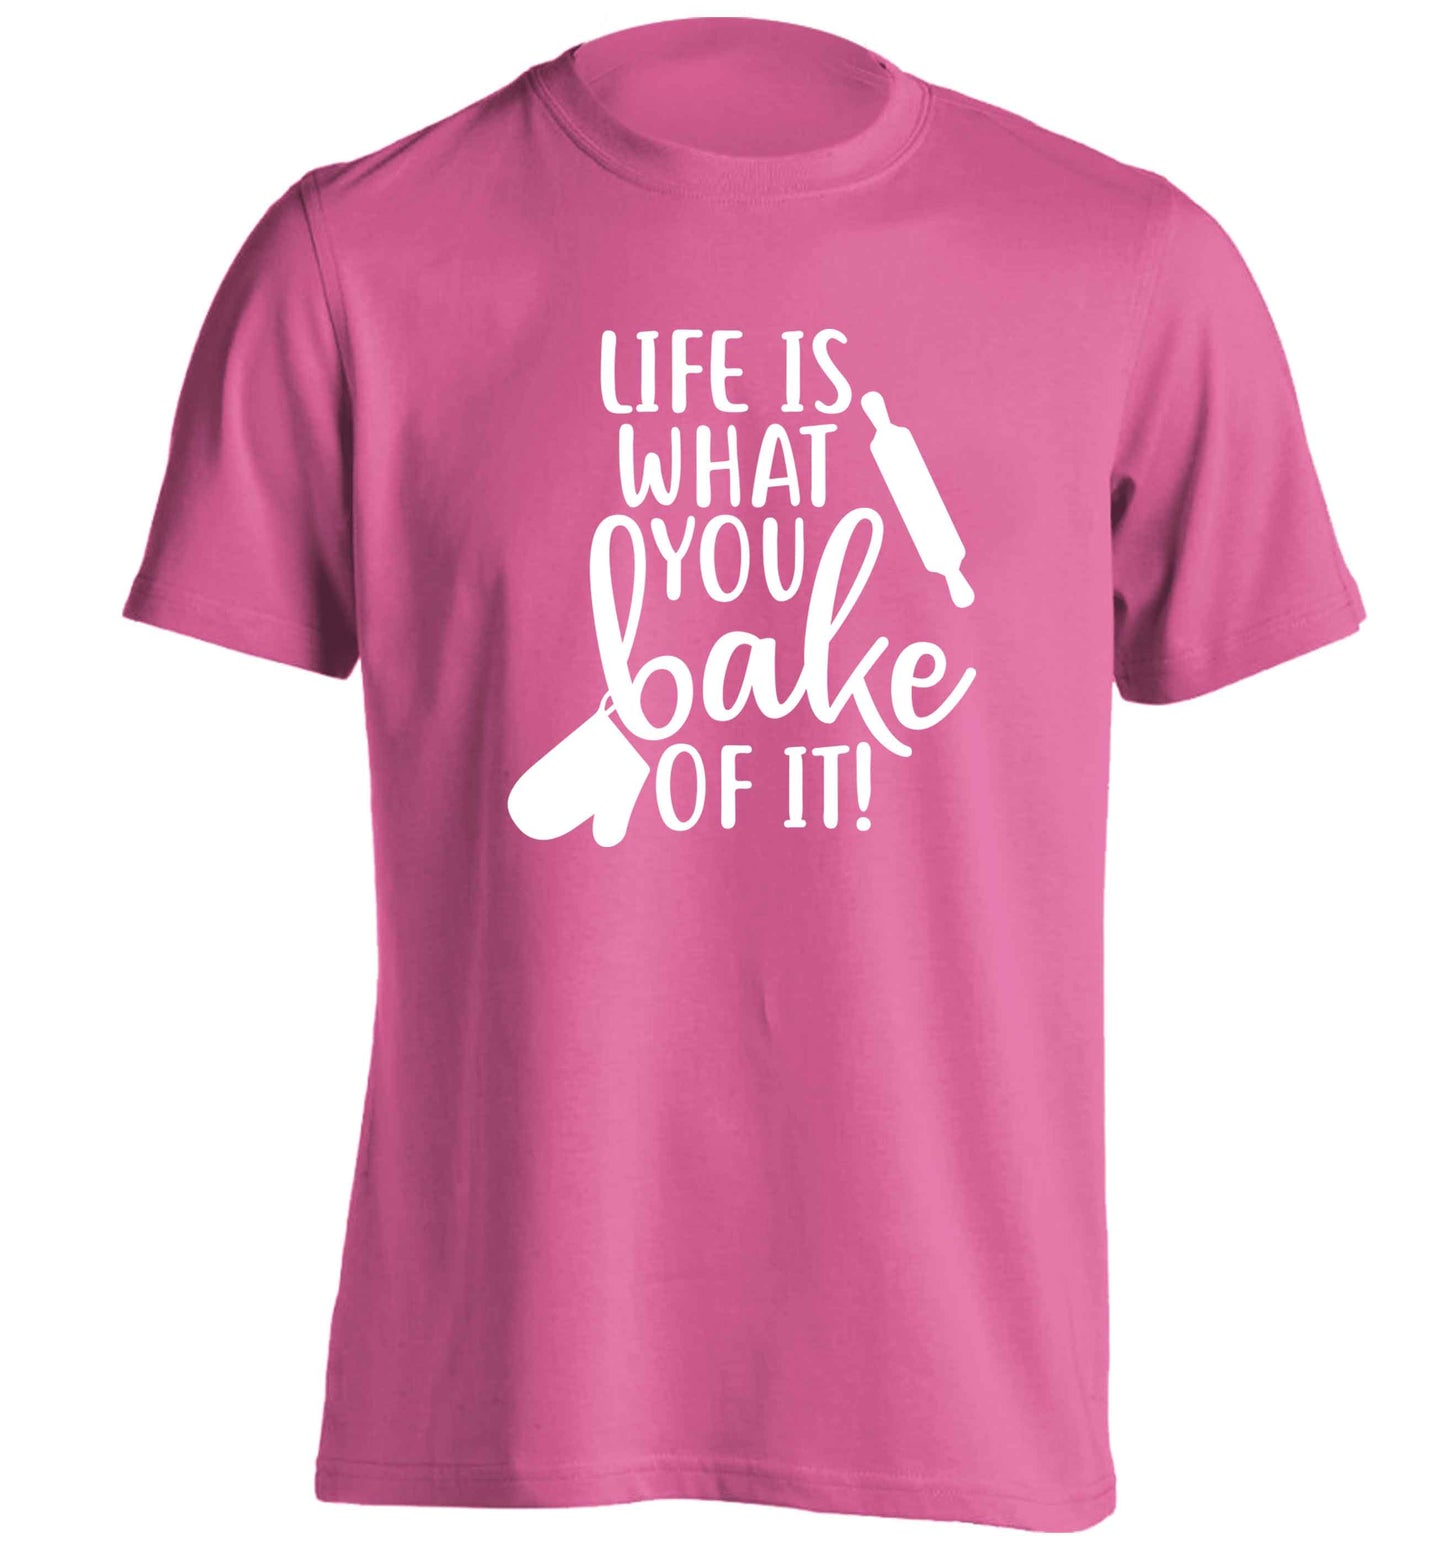 Life is what you bake of it adults unisex pink Tshirt 2XL